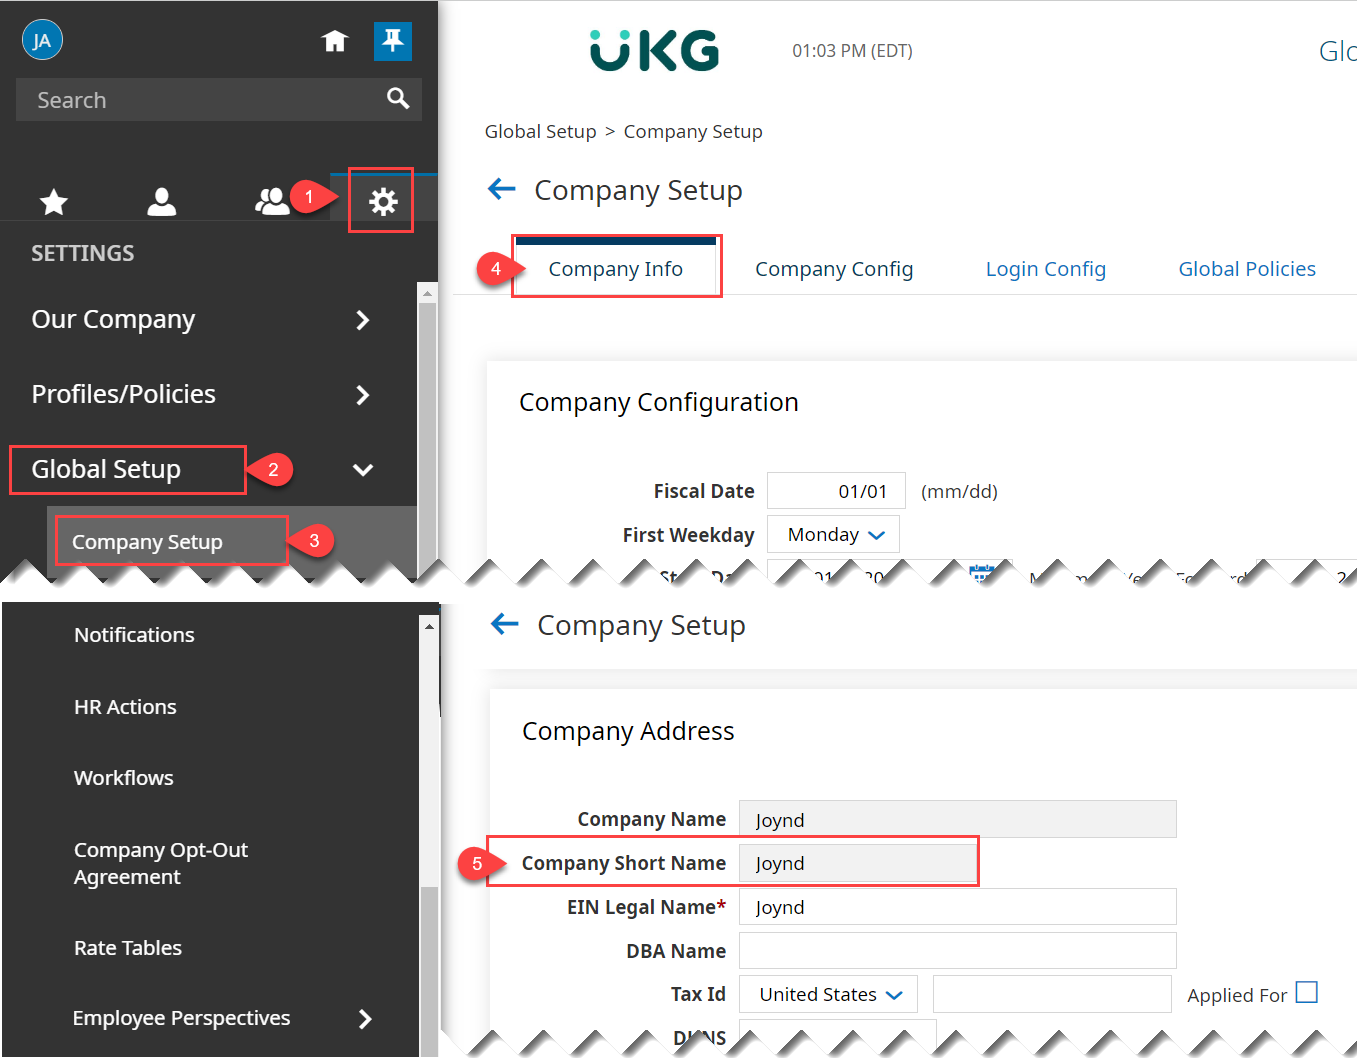 The UKG Ready platform shows company short name and company ID listed